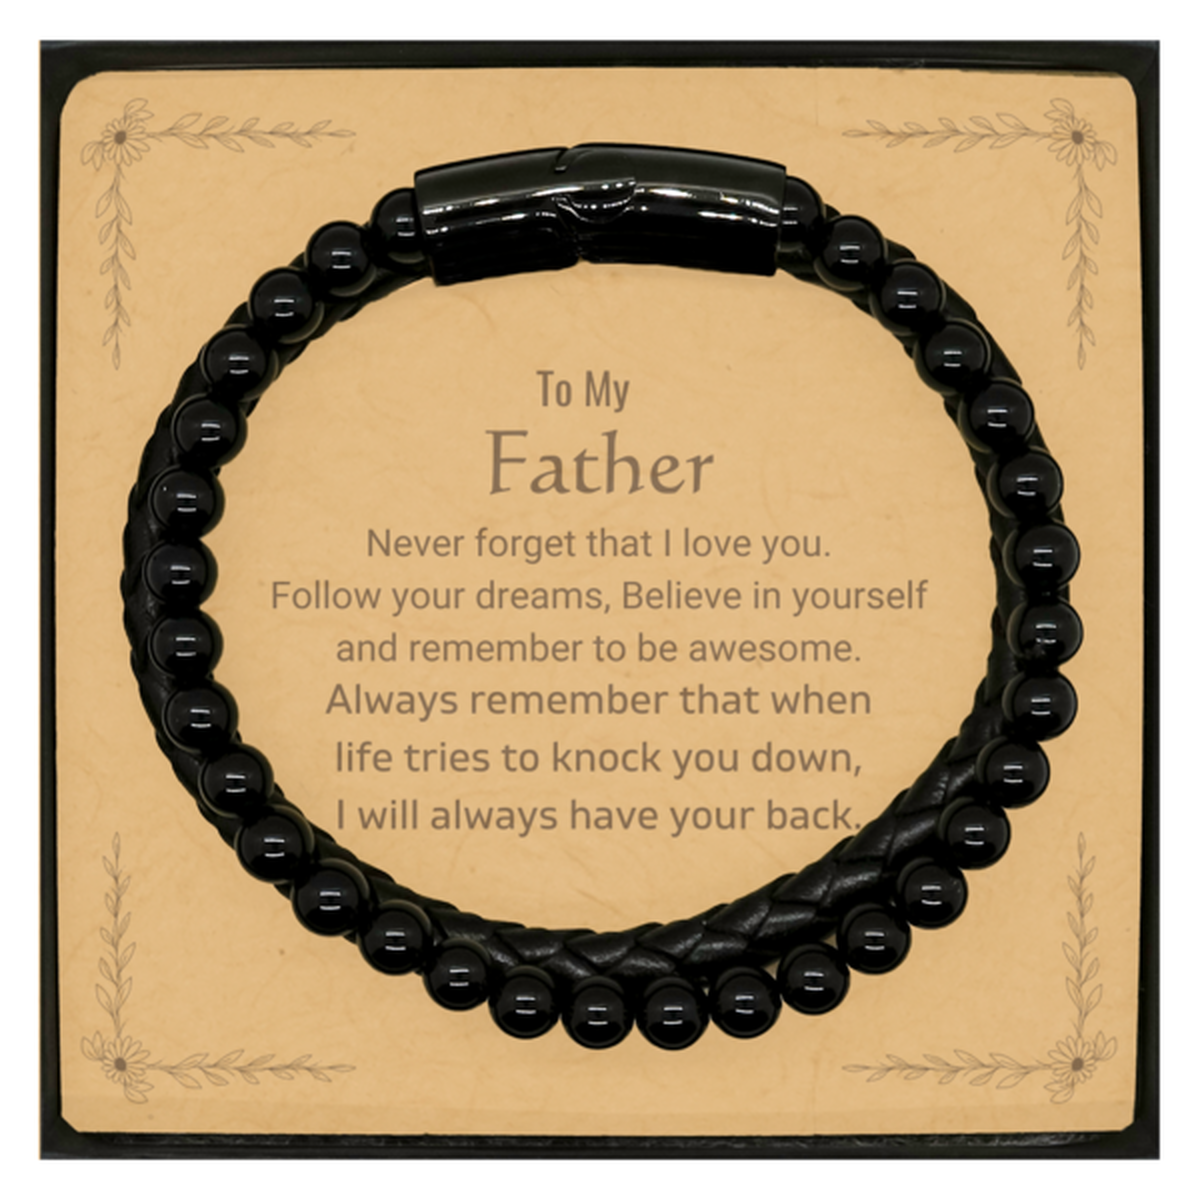 Inspirational Gifts for Father, Follow your dreams, Believe in yourself, Father Stone Leather Bracelets, Birthday Christmas Unique Gifts For Father